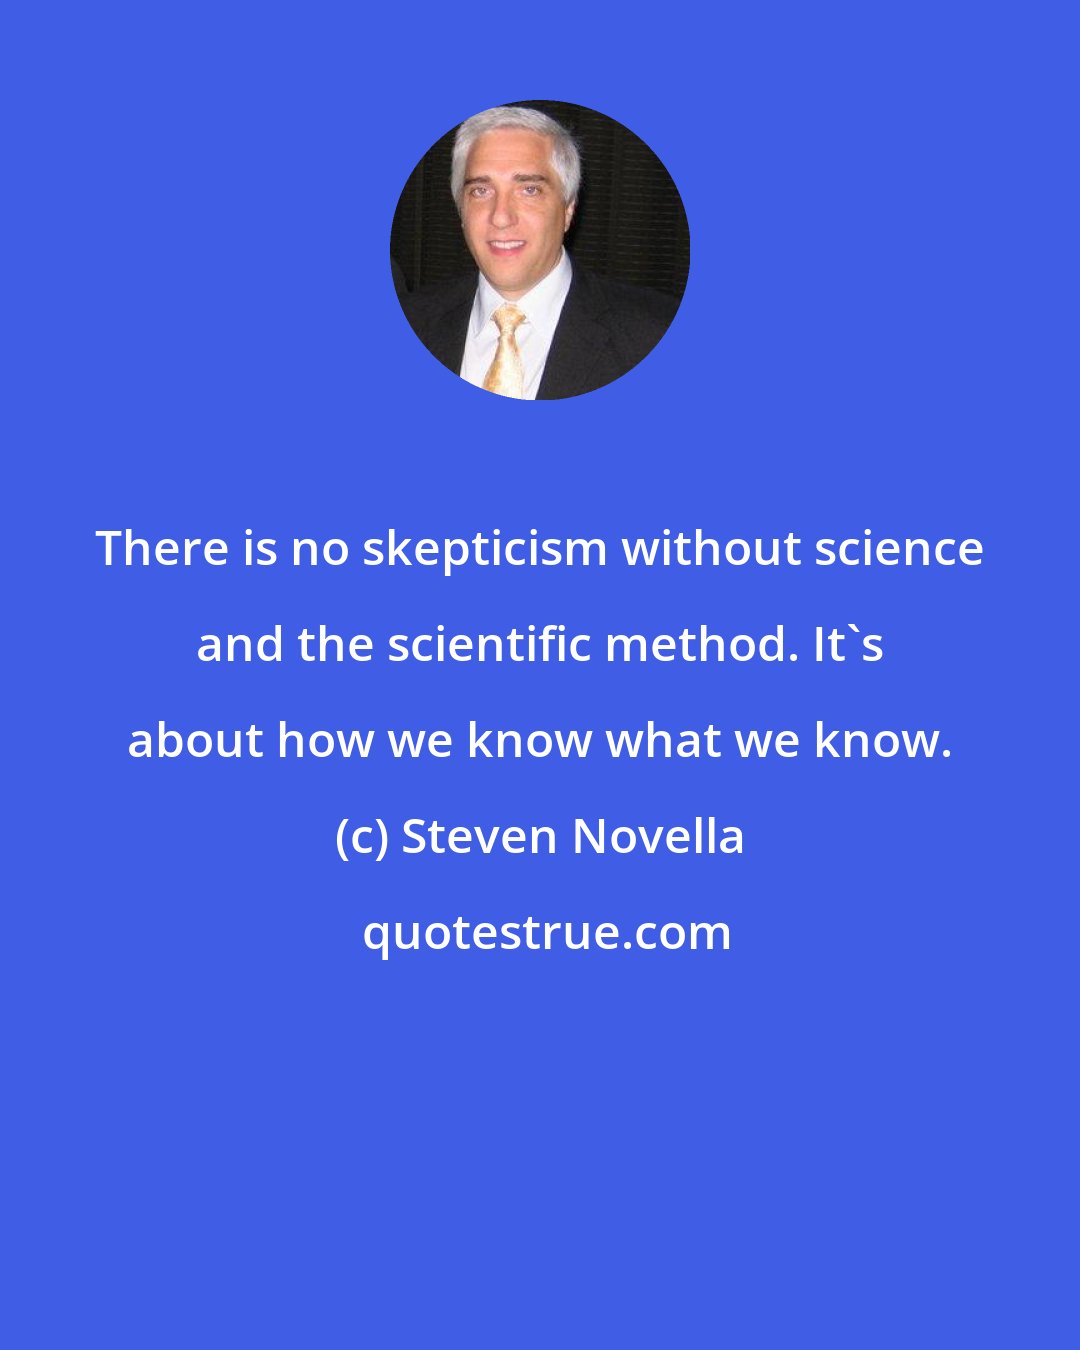 Steven Novella: There is no skepticism without science and the scientific method. It's about how we know what we know.